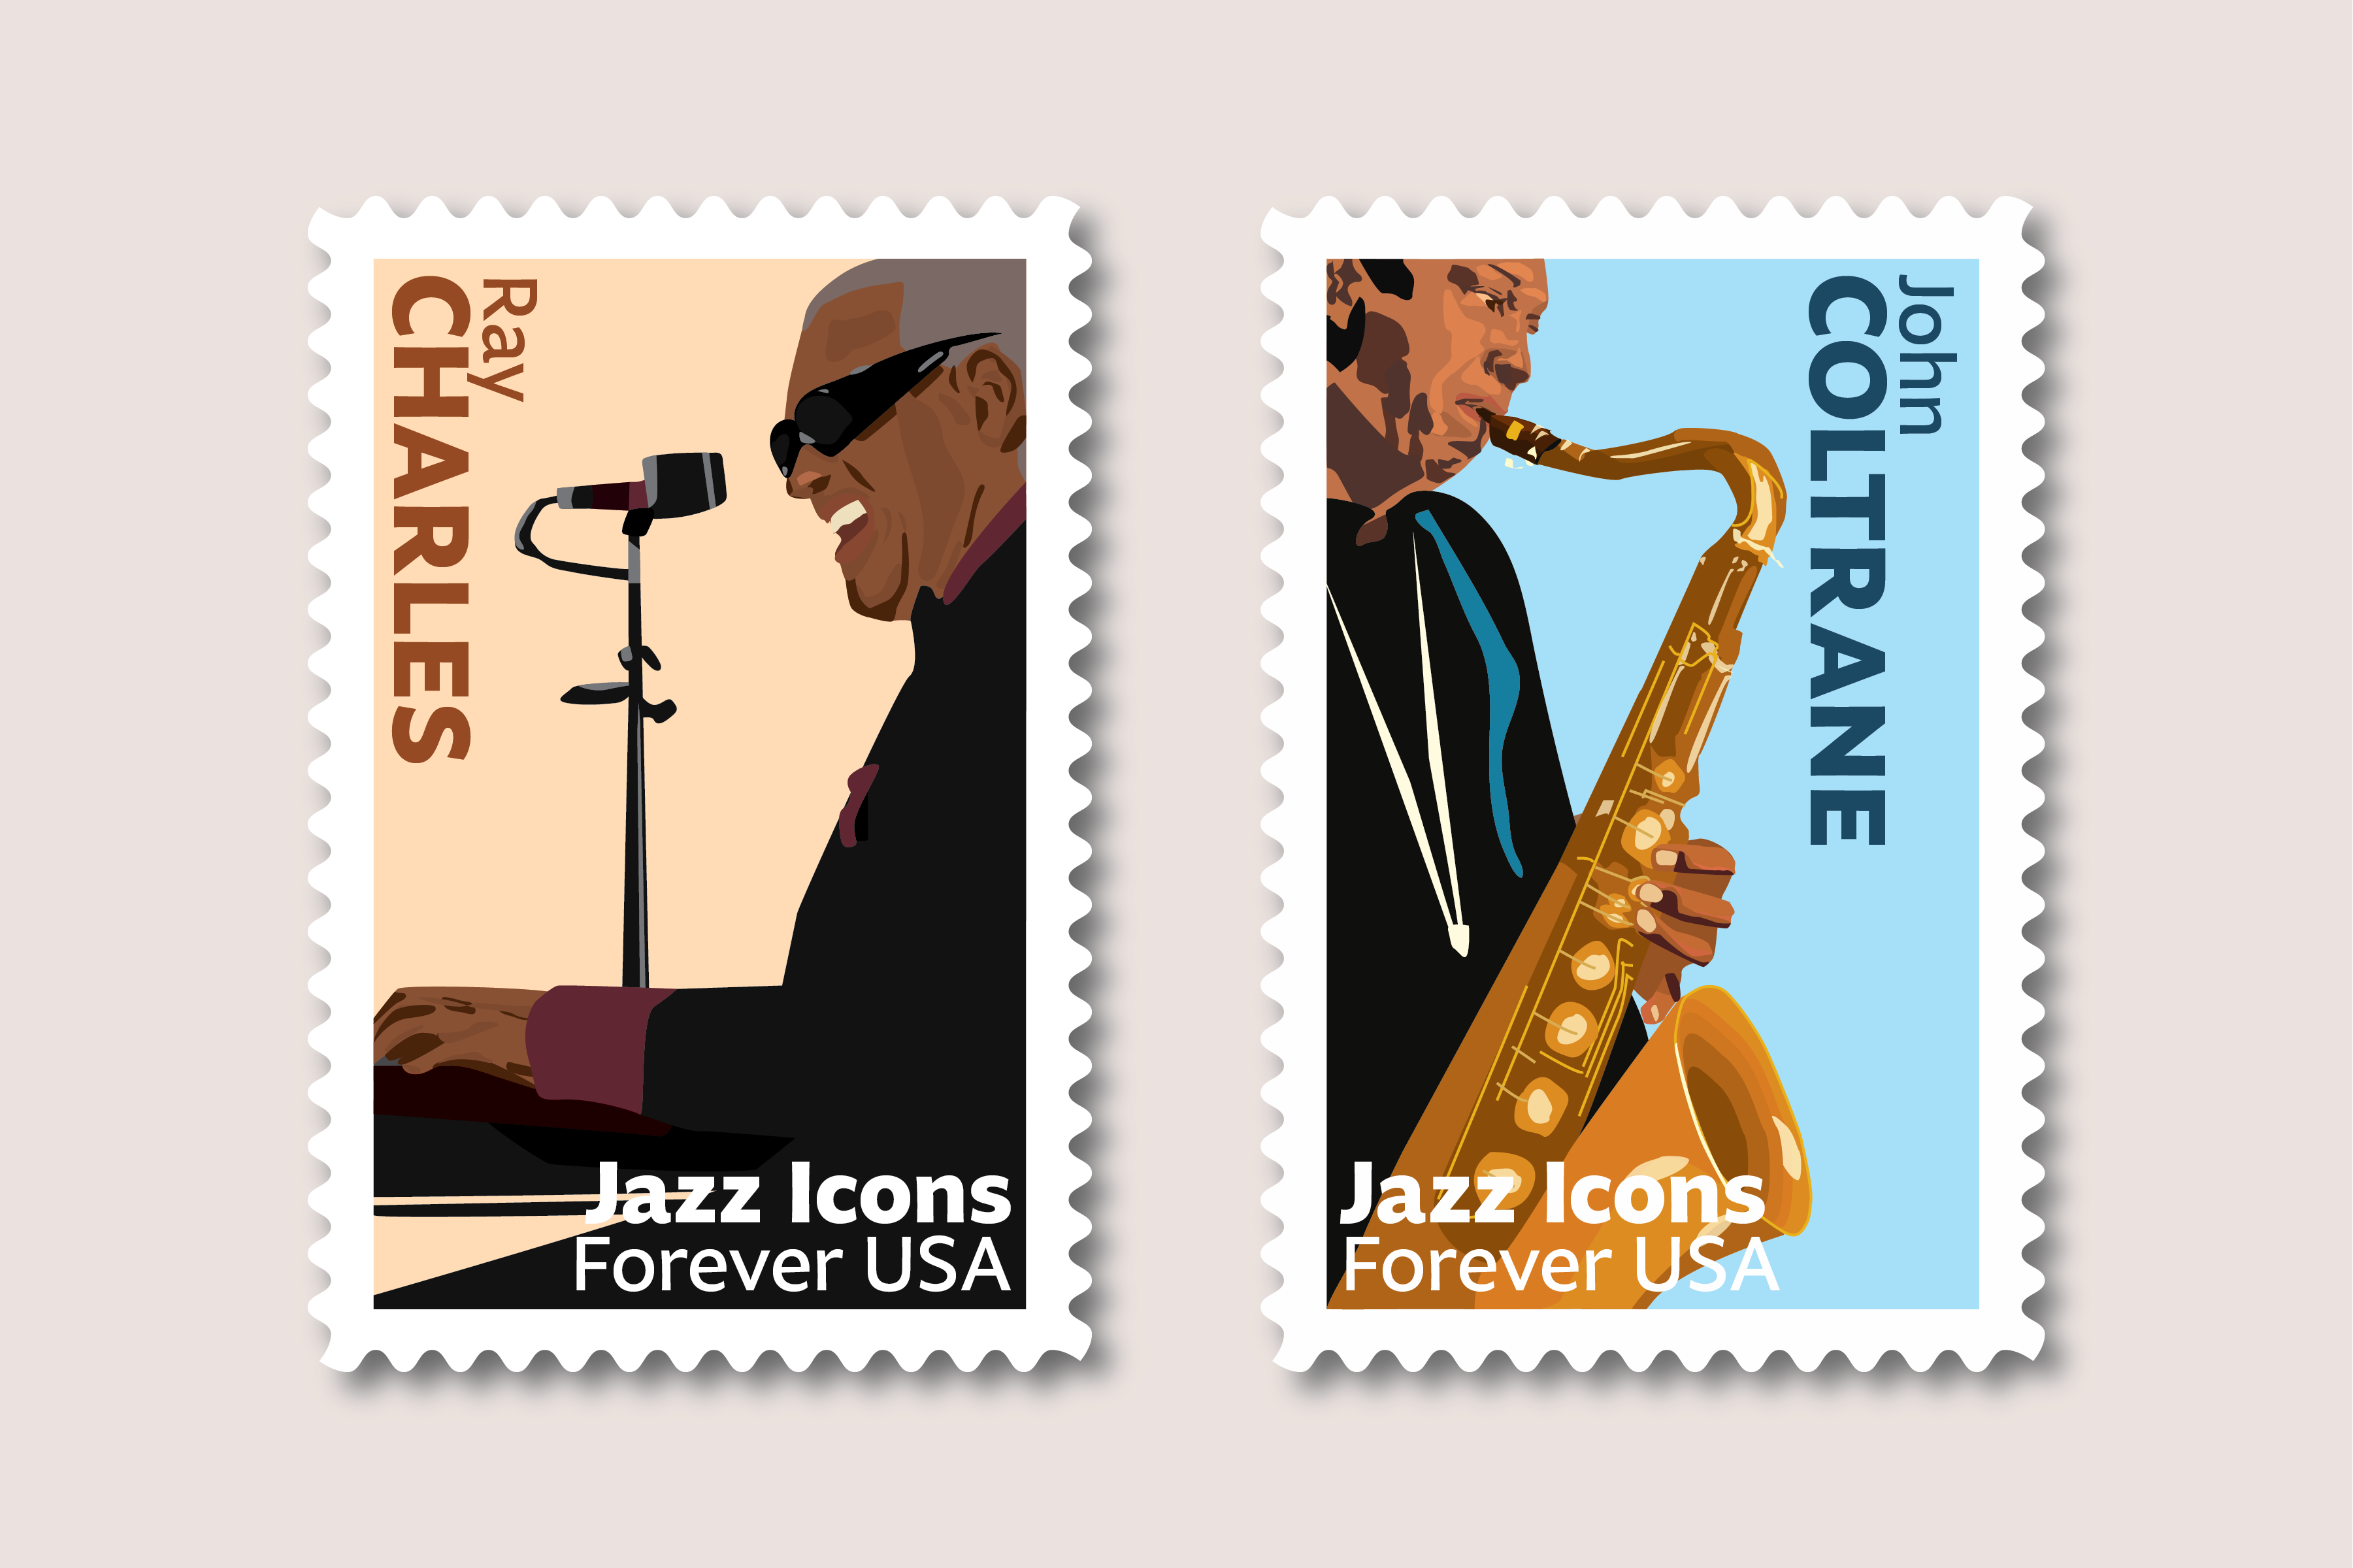 Postage Stamps Series